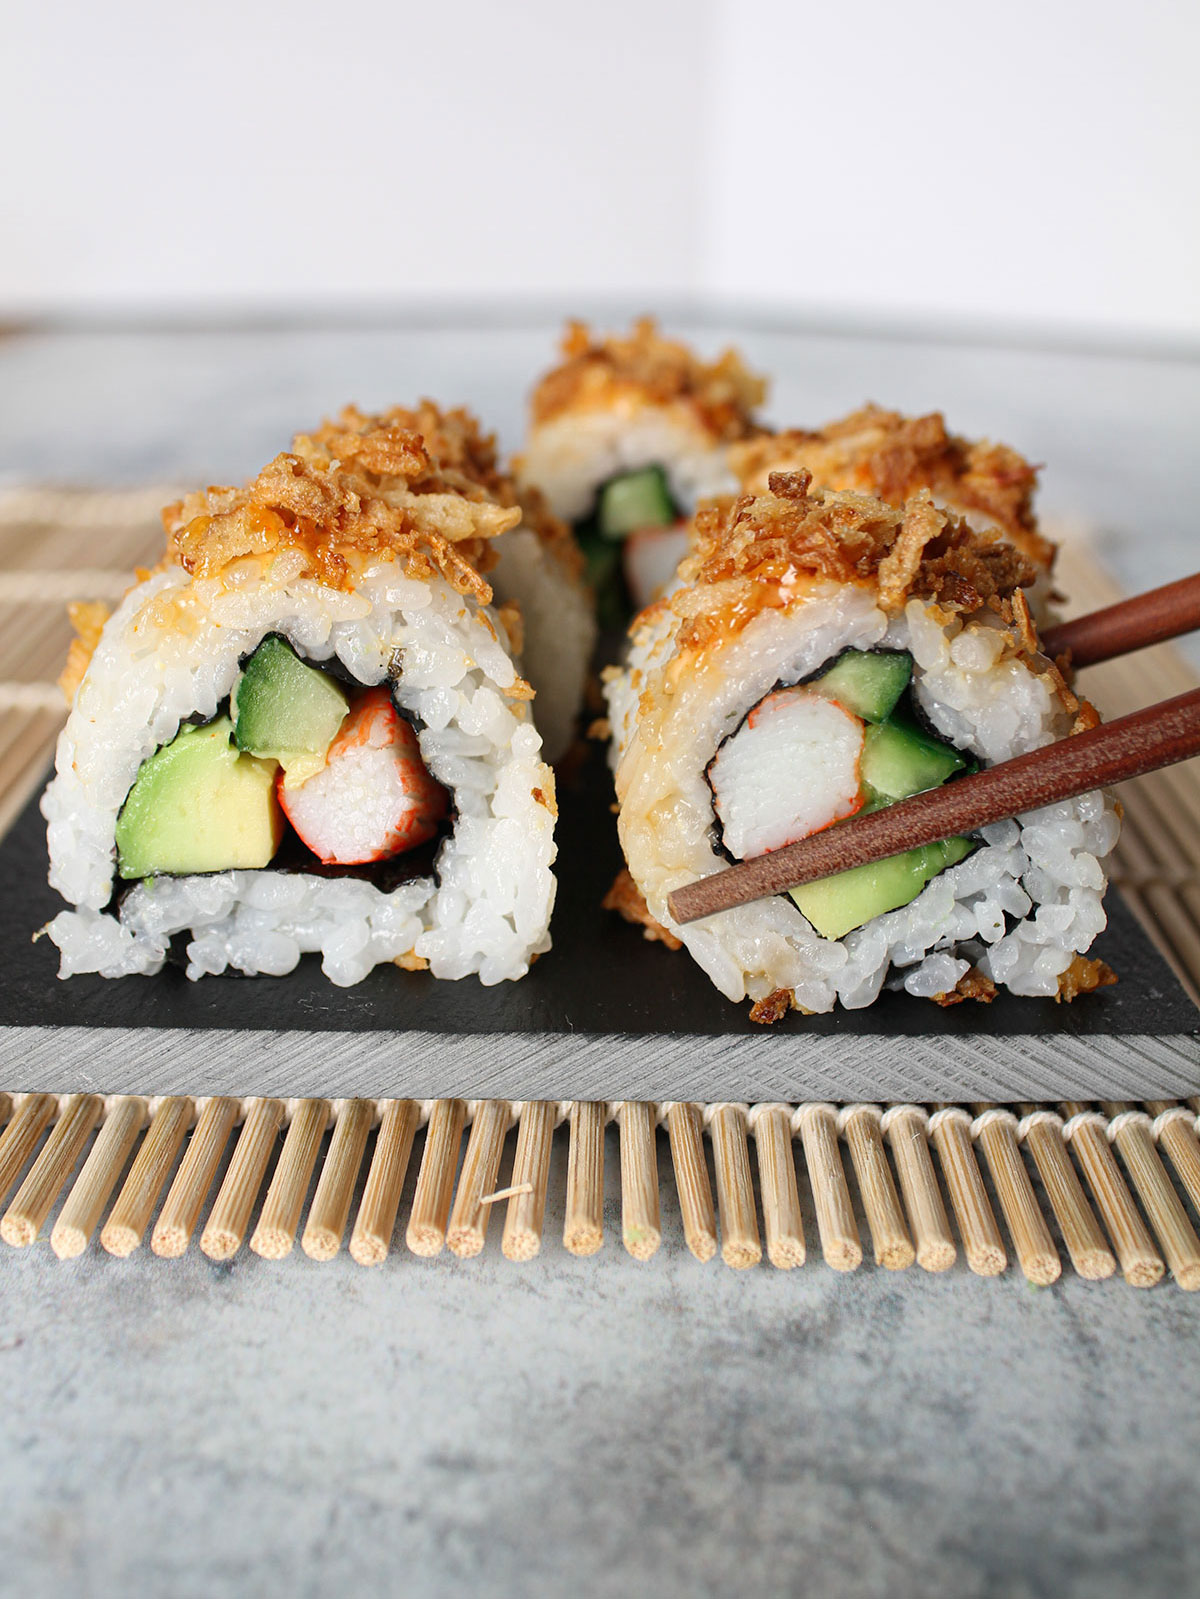 Sushi roll with smoked tuna with cucumber and - Stock Photo